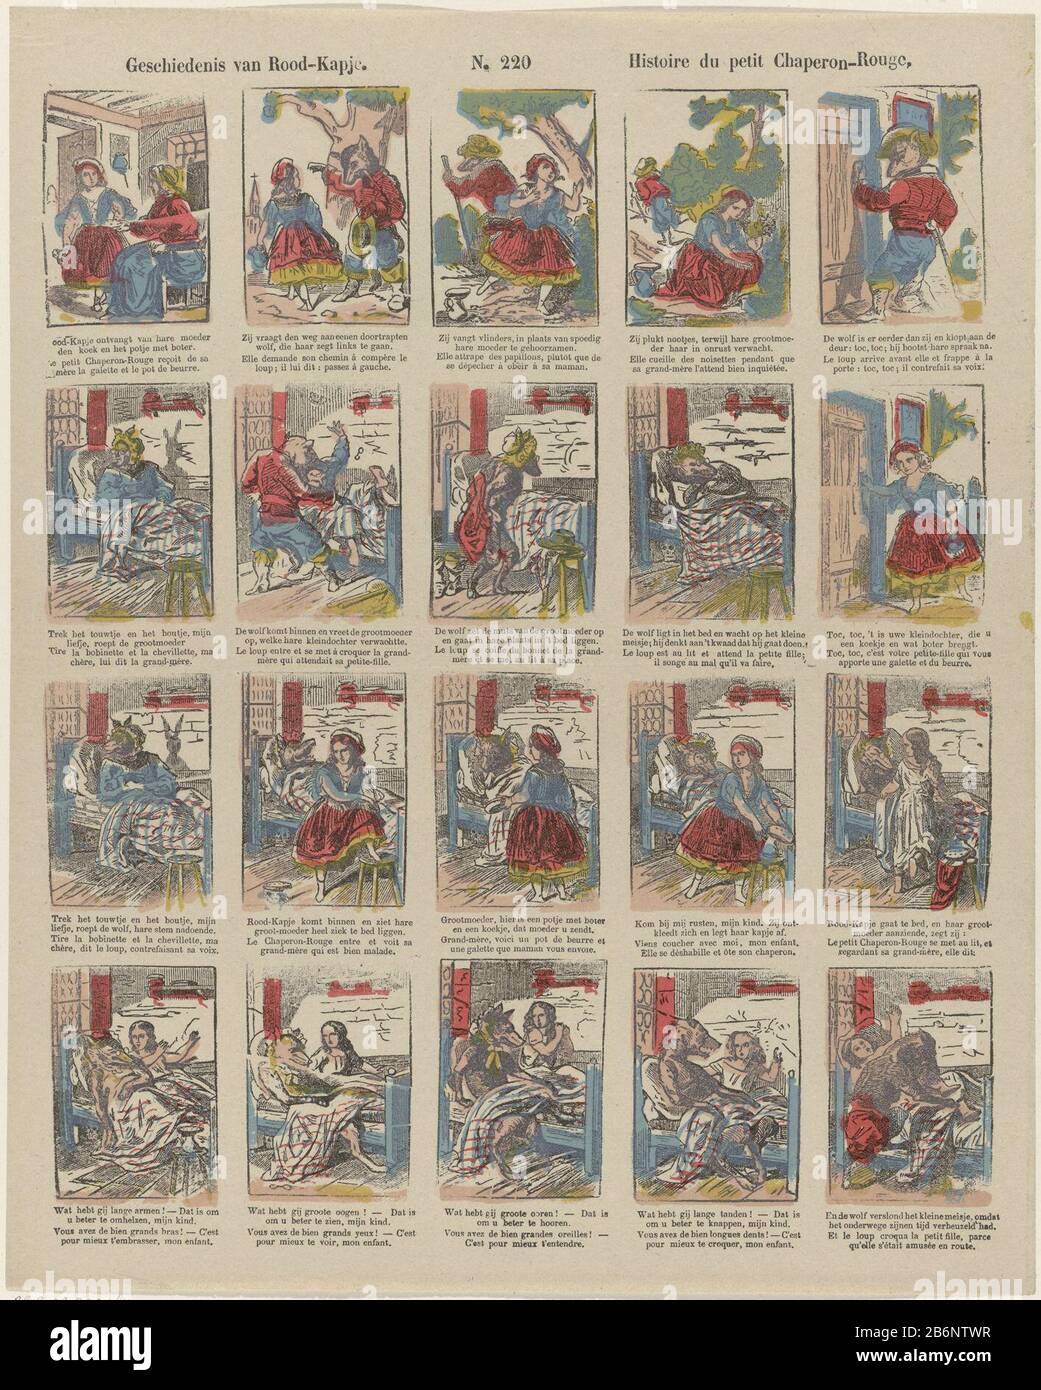 Geschiedenis van Rood-kapje Histoire du petit Chaperon-Rouge (titel op object) leaf with 20 scenes from the fairy tale of Little Red Riding Hood. Under each show a caption in Dutch and French. Numbered top center: N. 220. Manufacturer : Publisher: Brepols & Dierckx son printmaker: anonymous place manufacture Turnhout Dating: 1833 - 1911 Physical characteristics: color lithograph in yellow, blue, pink and red; text printing material: paper Technique: color lithograph (process) / printing sizes: sheet: H 376 mm × W 302 mm Subject: stories and fairy tales and fairy tales: Little Red Riding-hood Stock Photo